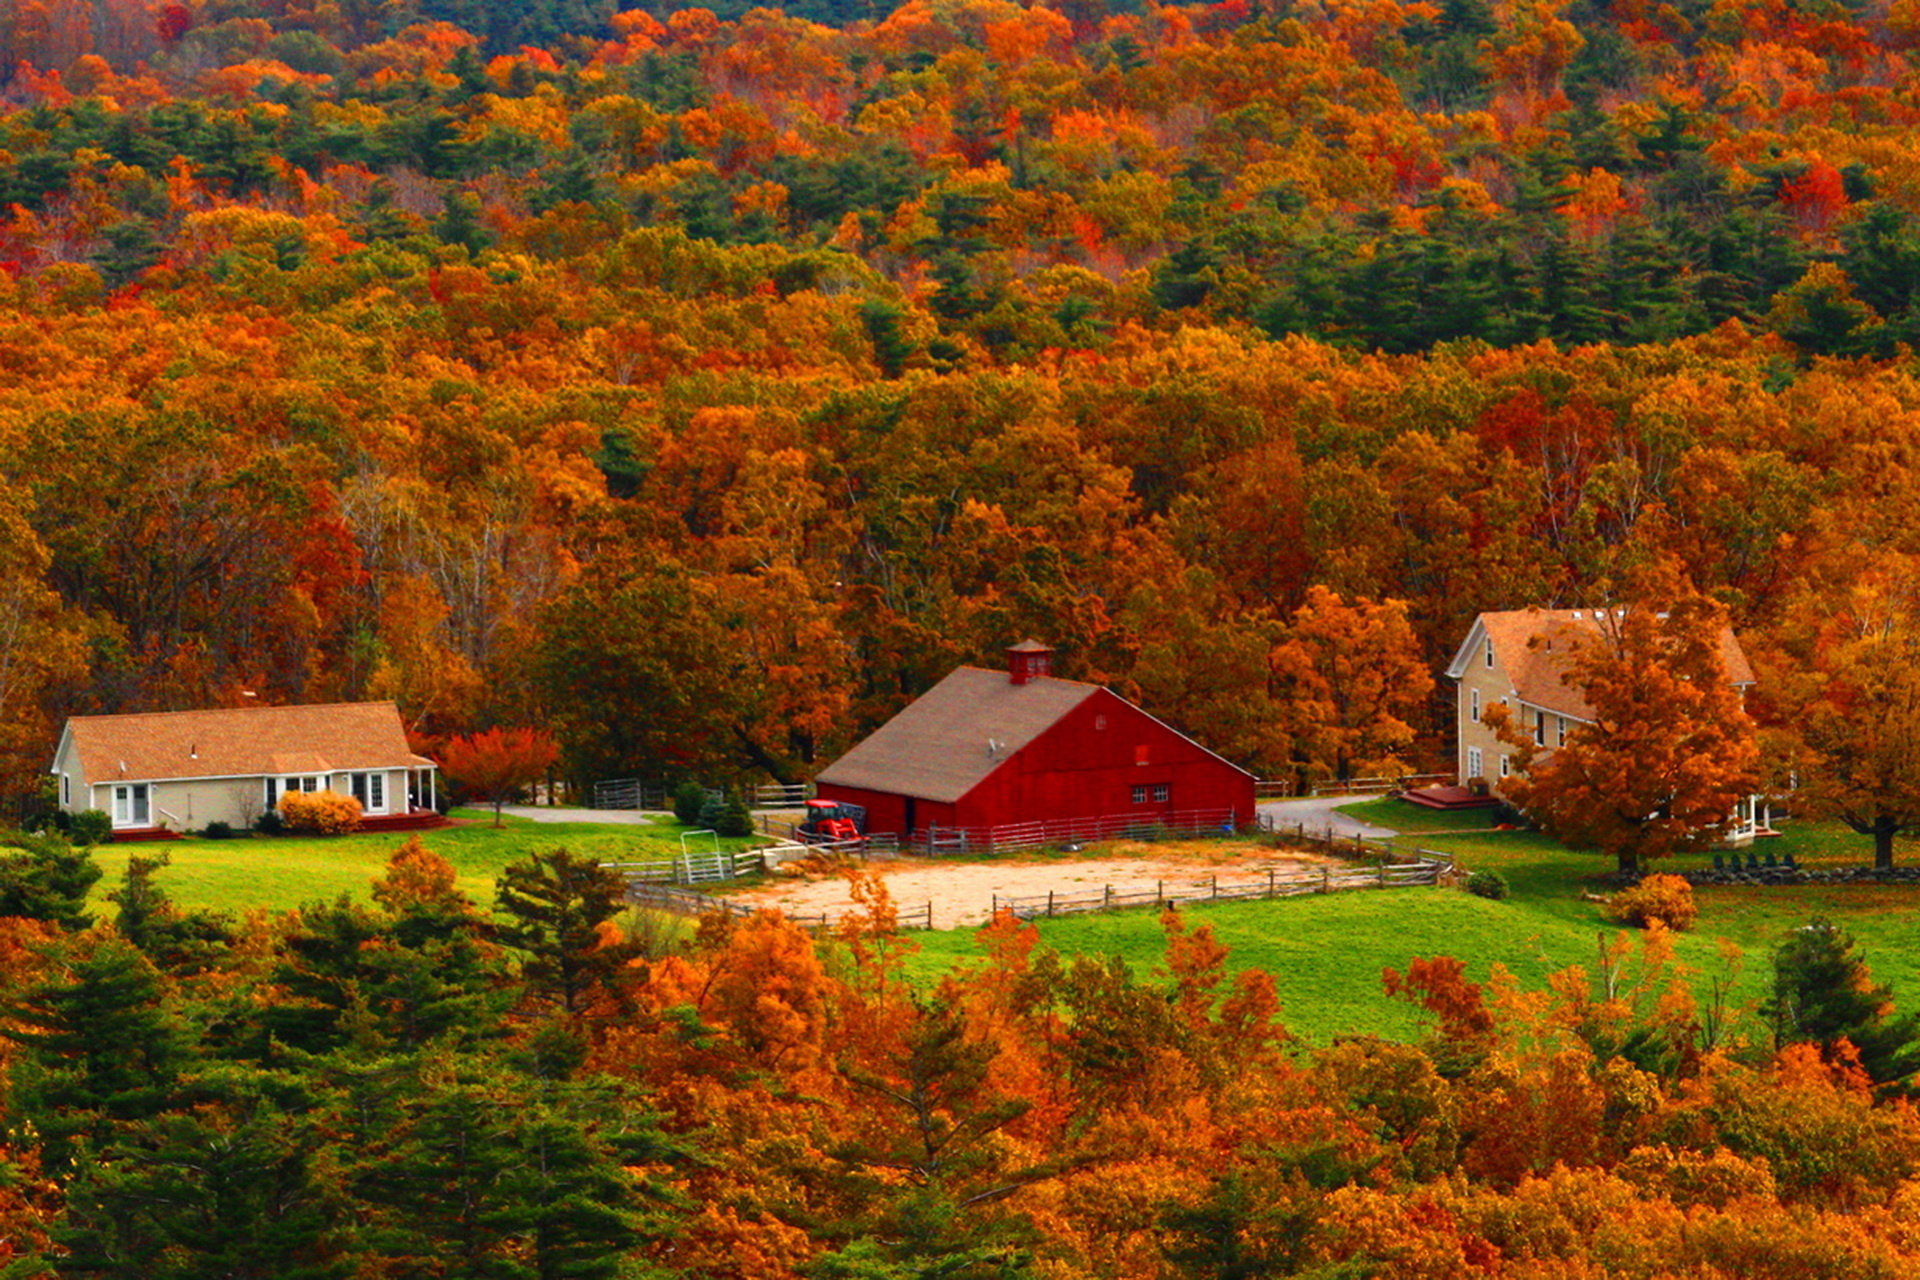 Wallpaper Full HD barn, man made, country, fall, forest, house, tree